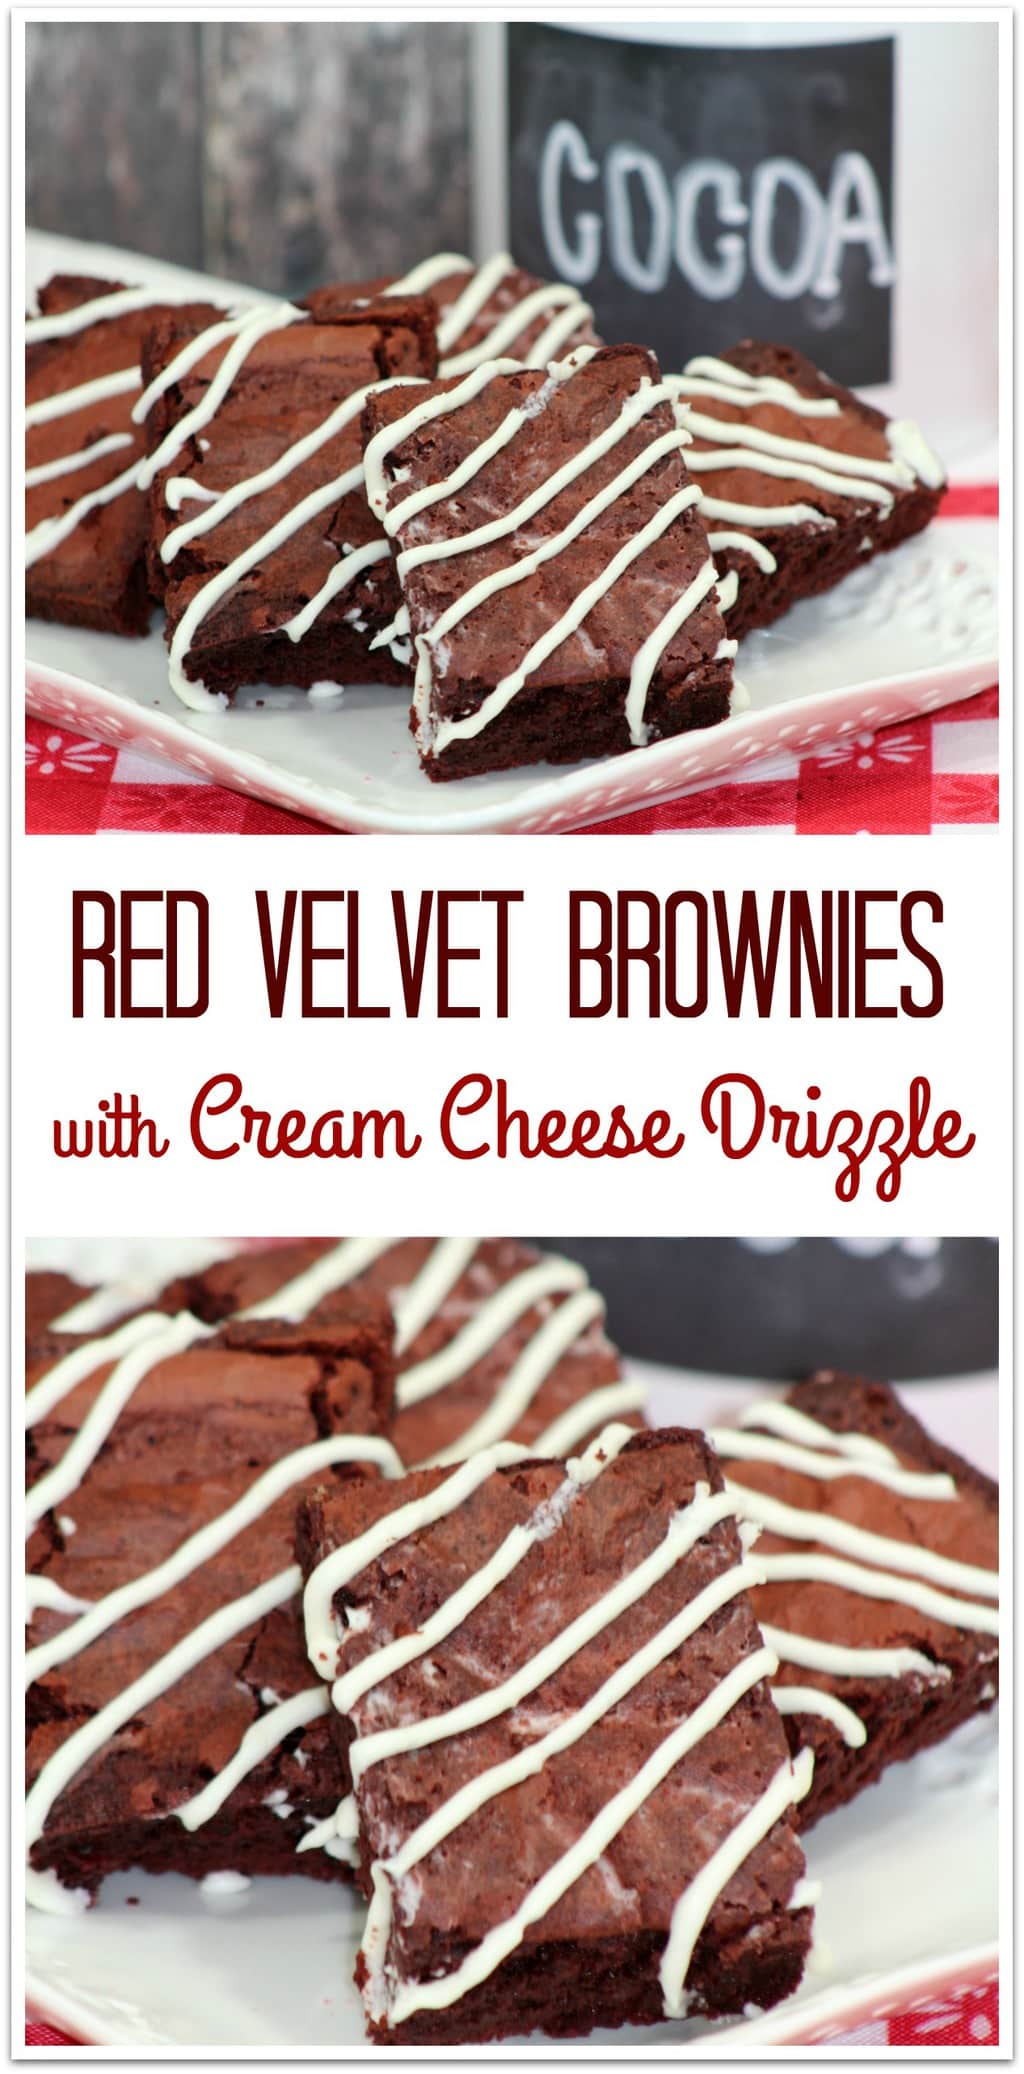 These Red Velvet Brownies are so easy to make and the flavor will knock your socks off! Chocolate and cream cheese go so well together, and you'll be out of the kitchen in no time! This is the perfect recipe for that Valentine's Day party, but is a great easy recipe for any occasion! 